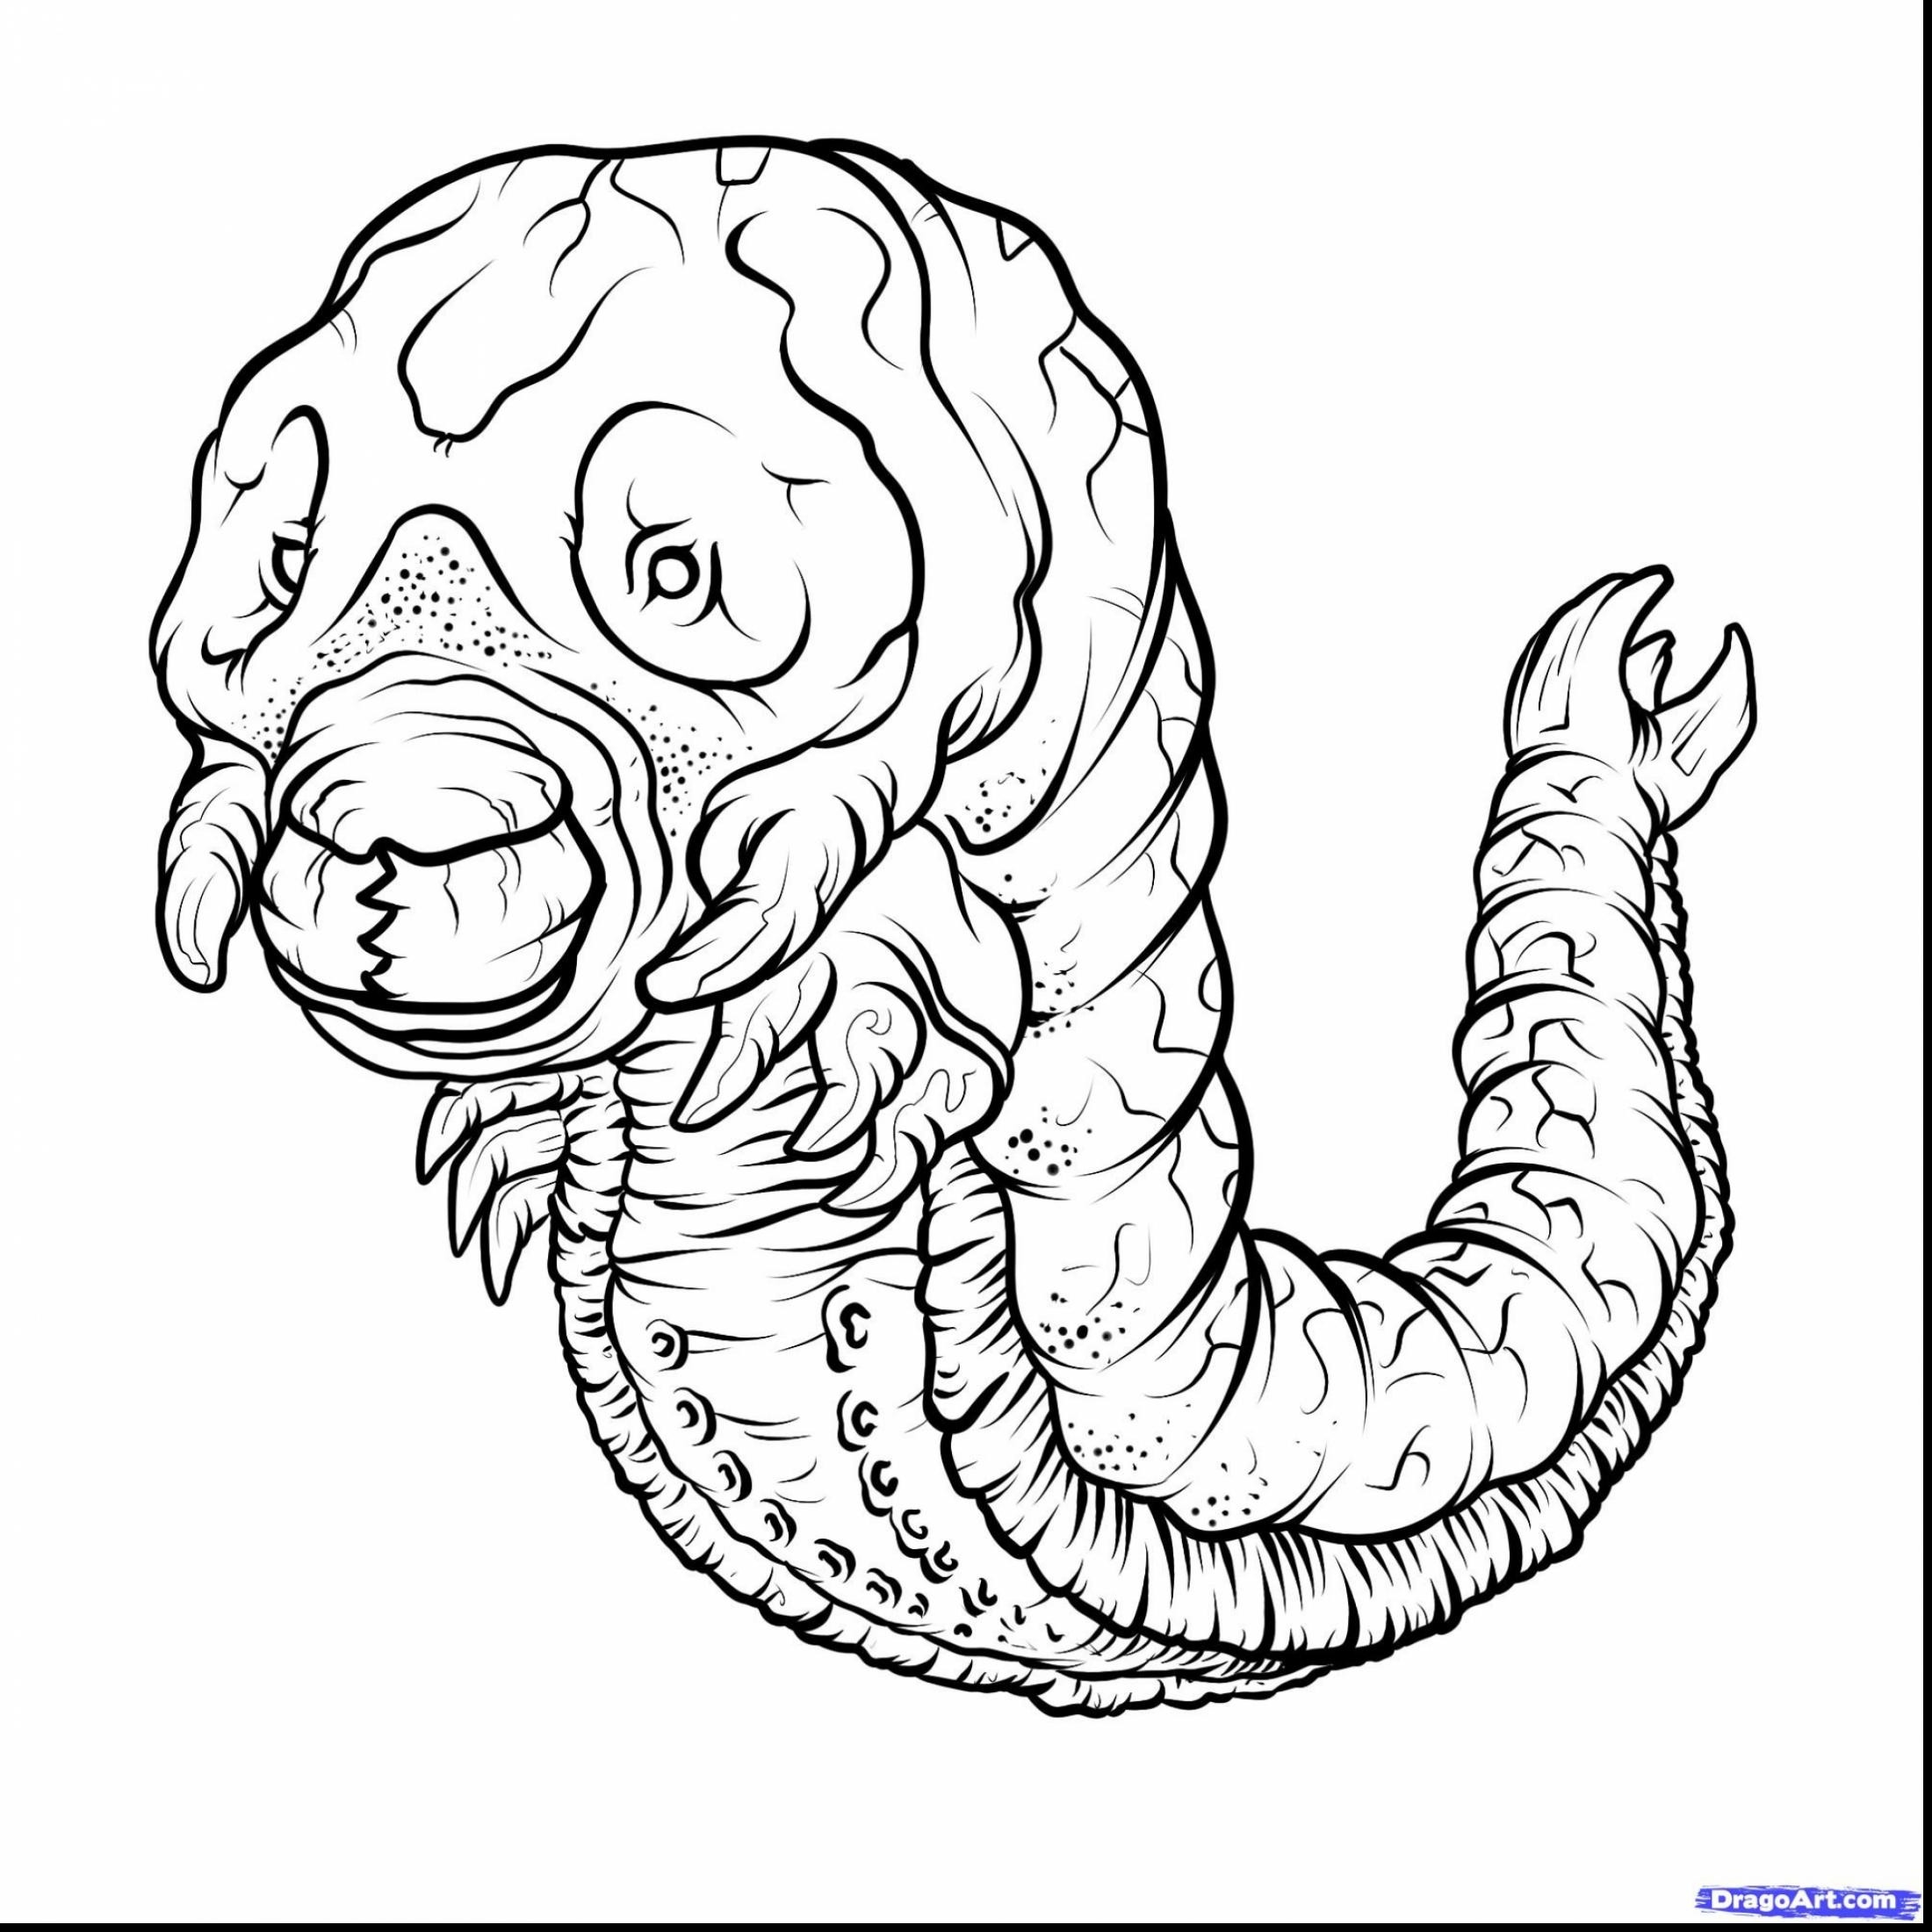 Goosebumps Horrorland Coloring Pages at GetColorings.com | Free